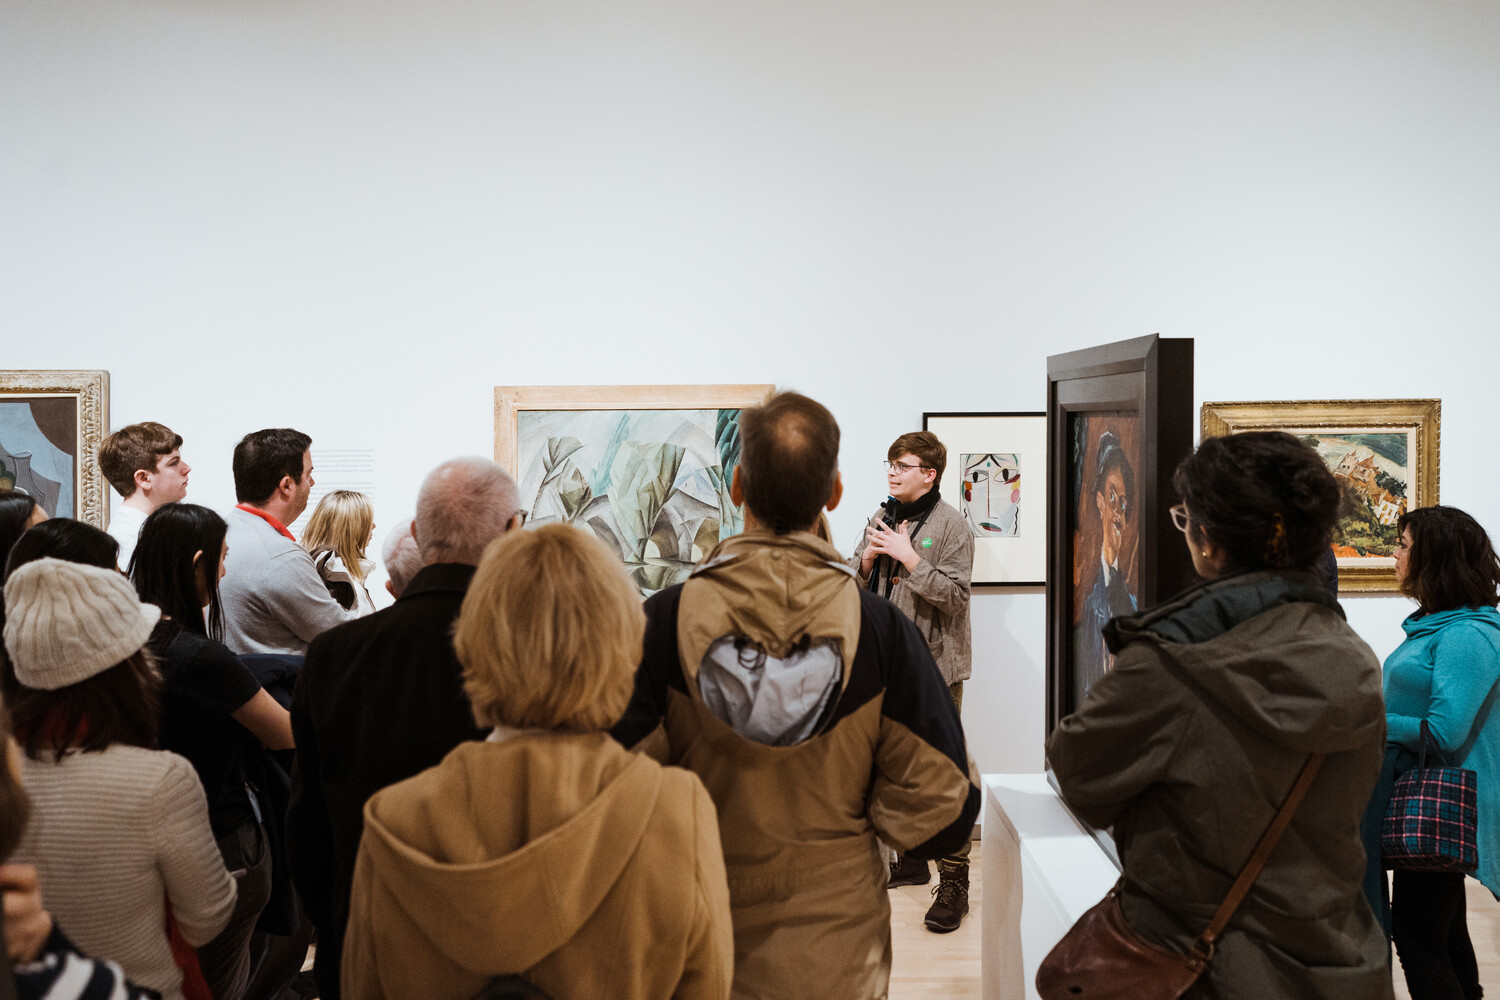 A person speaks to a large group of people in a gallery displaying paintings